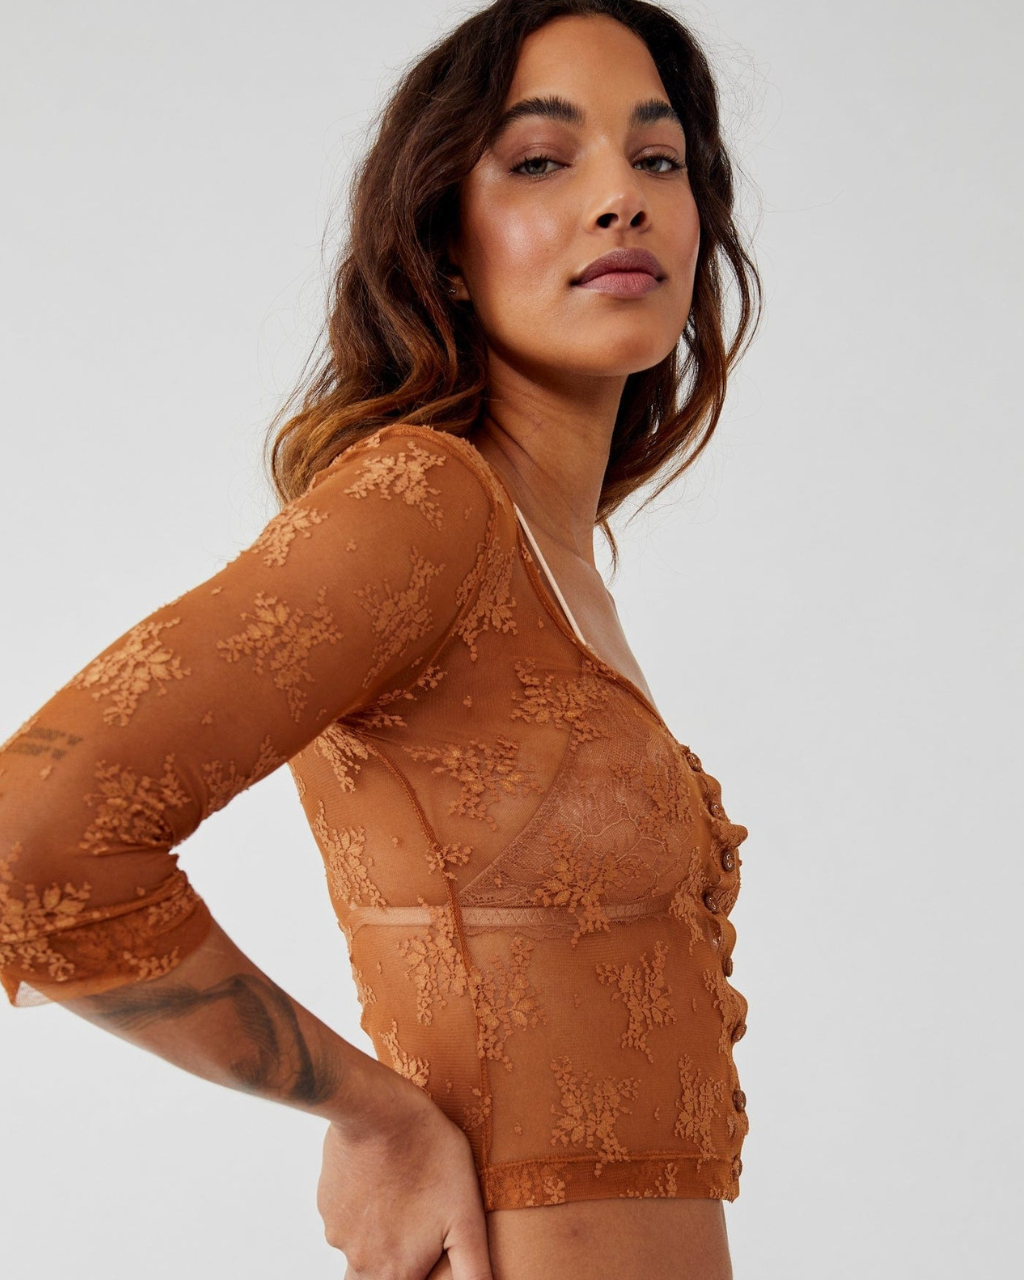 Lost in Lace Sheer Cardi Bright Cider, Long Blouse by Free People | LIT Boutique